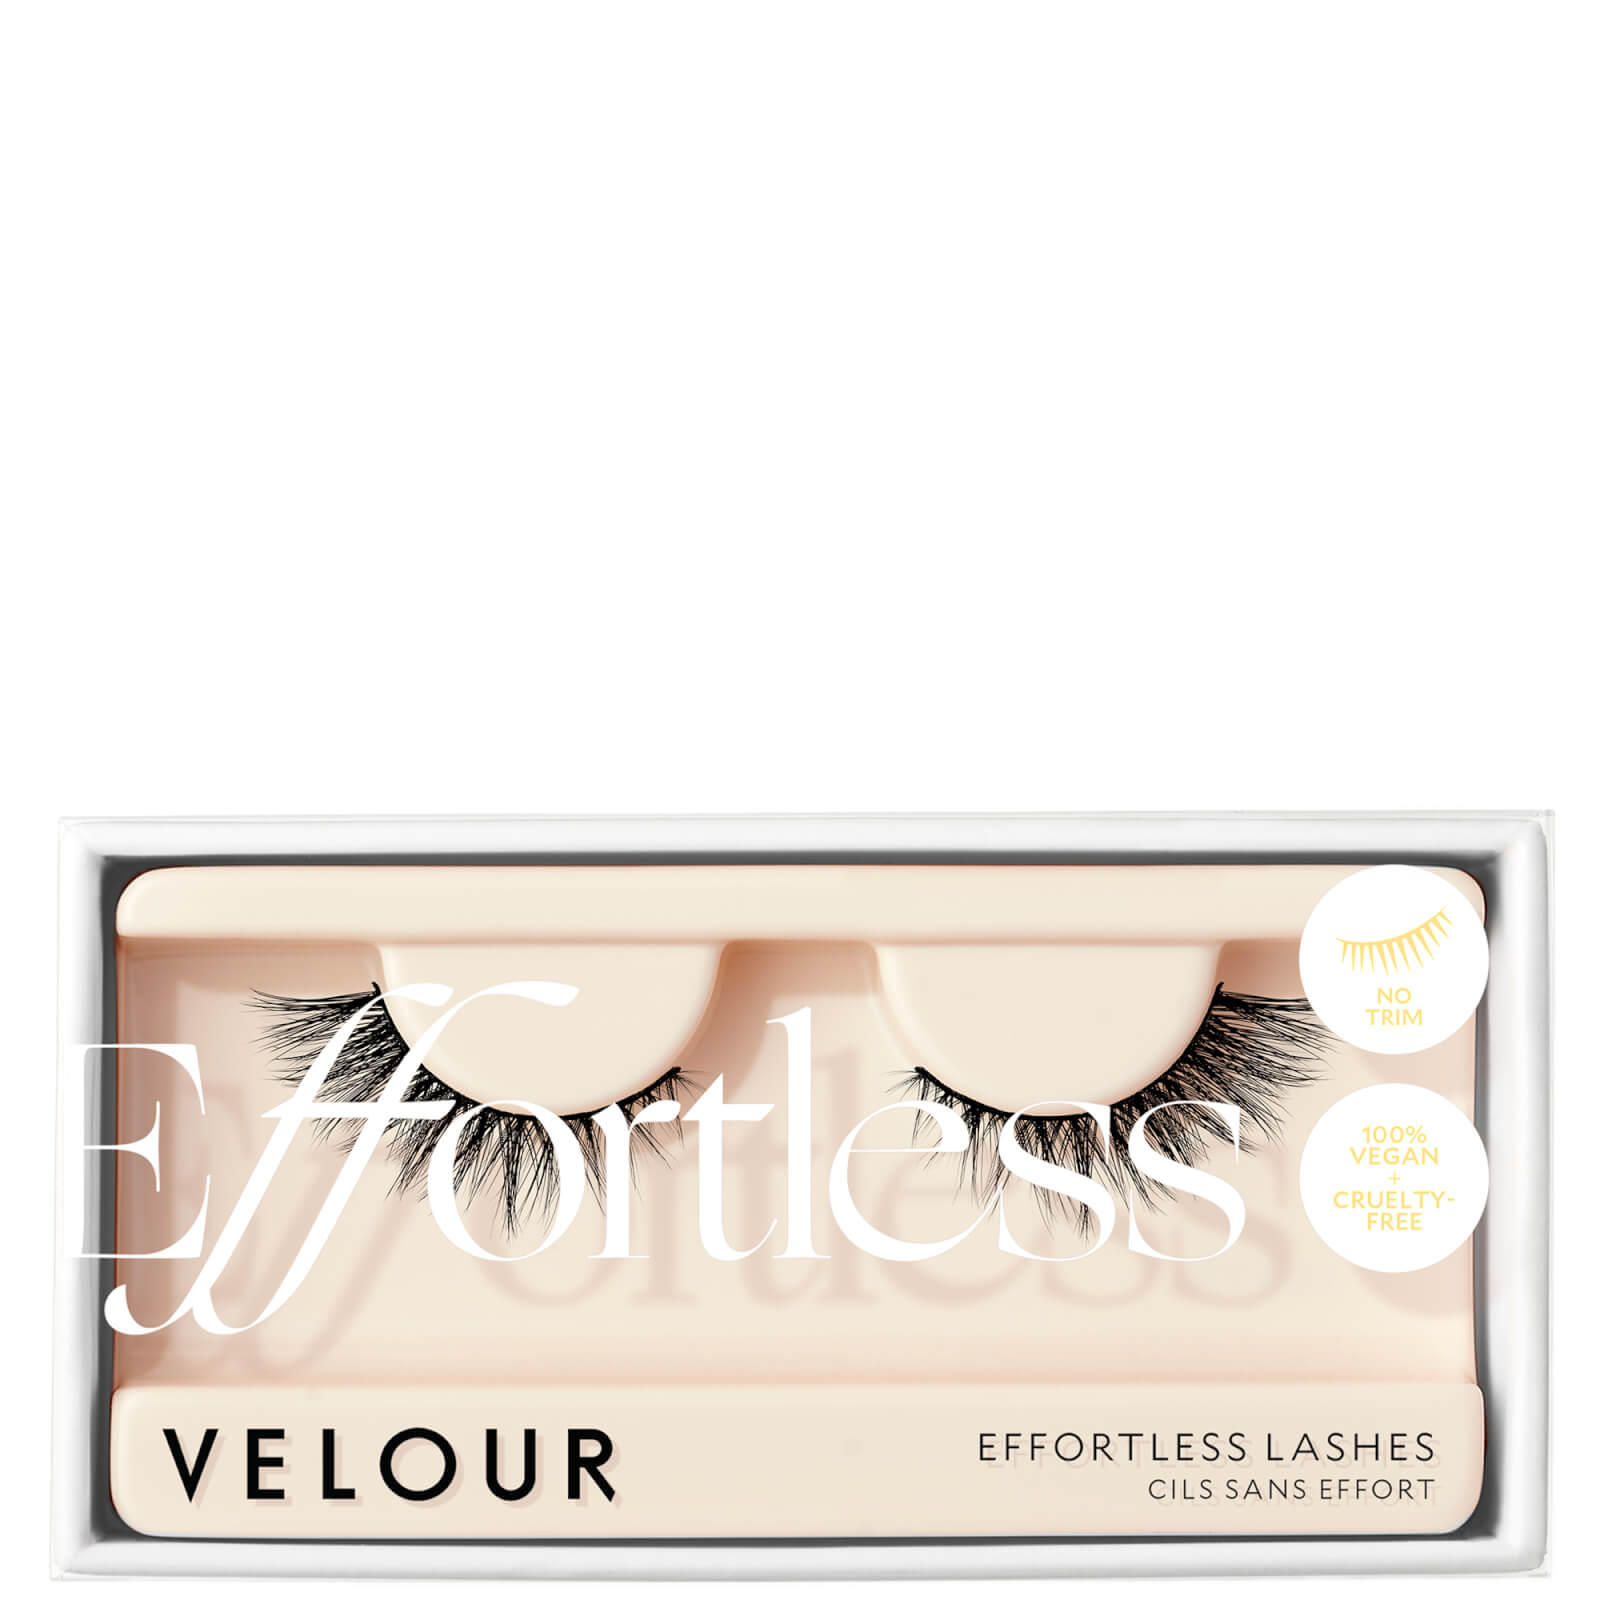 Velour Lashes Effortless Would I lie? Lashes